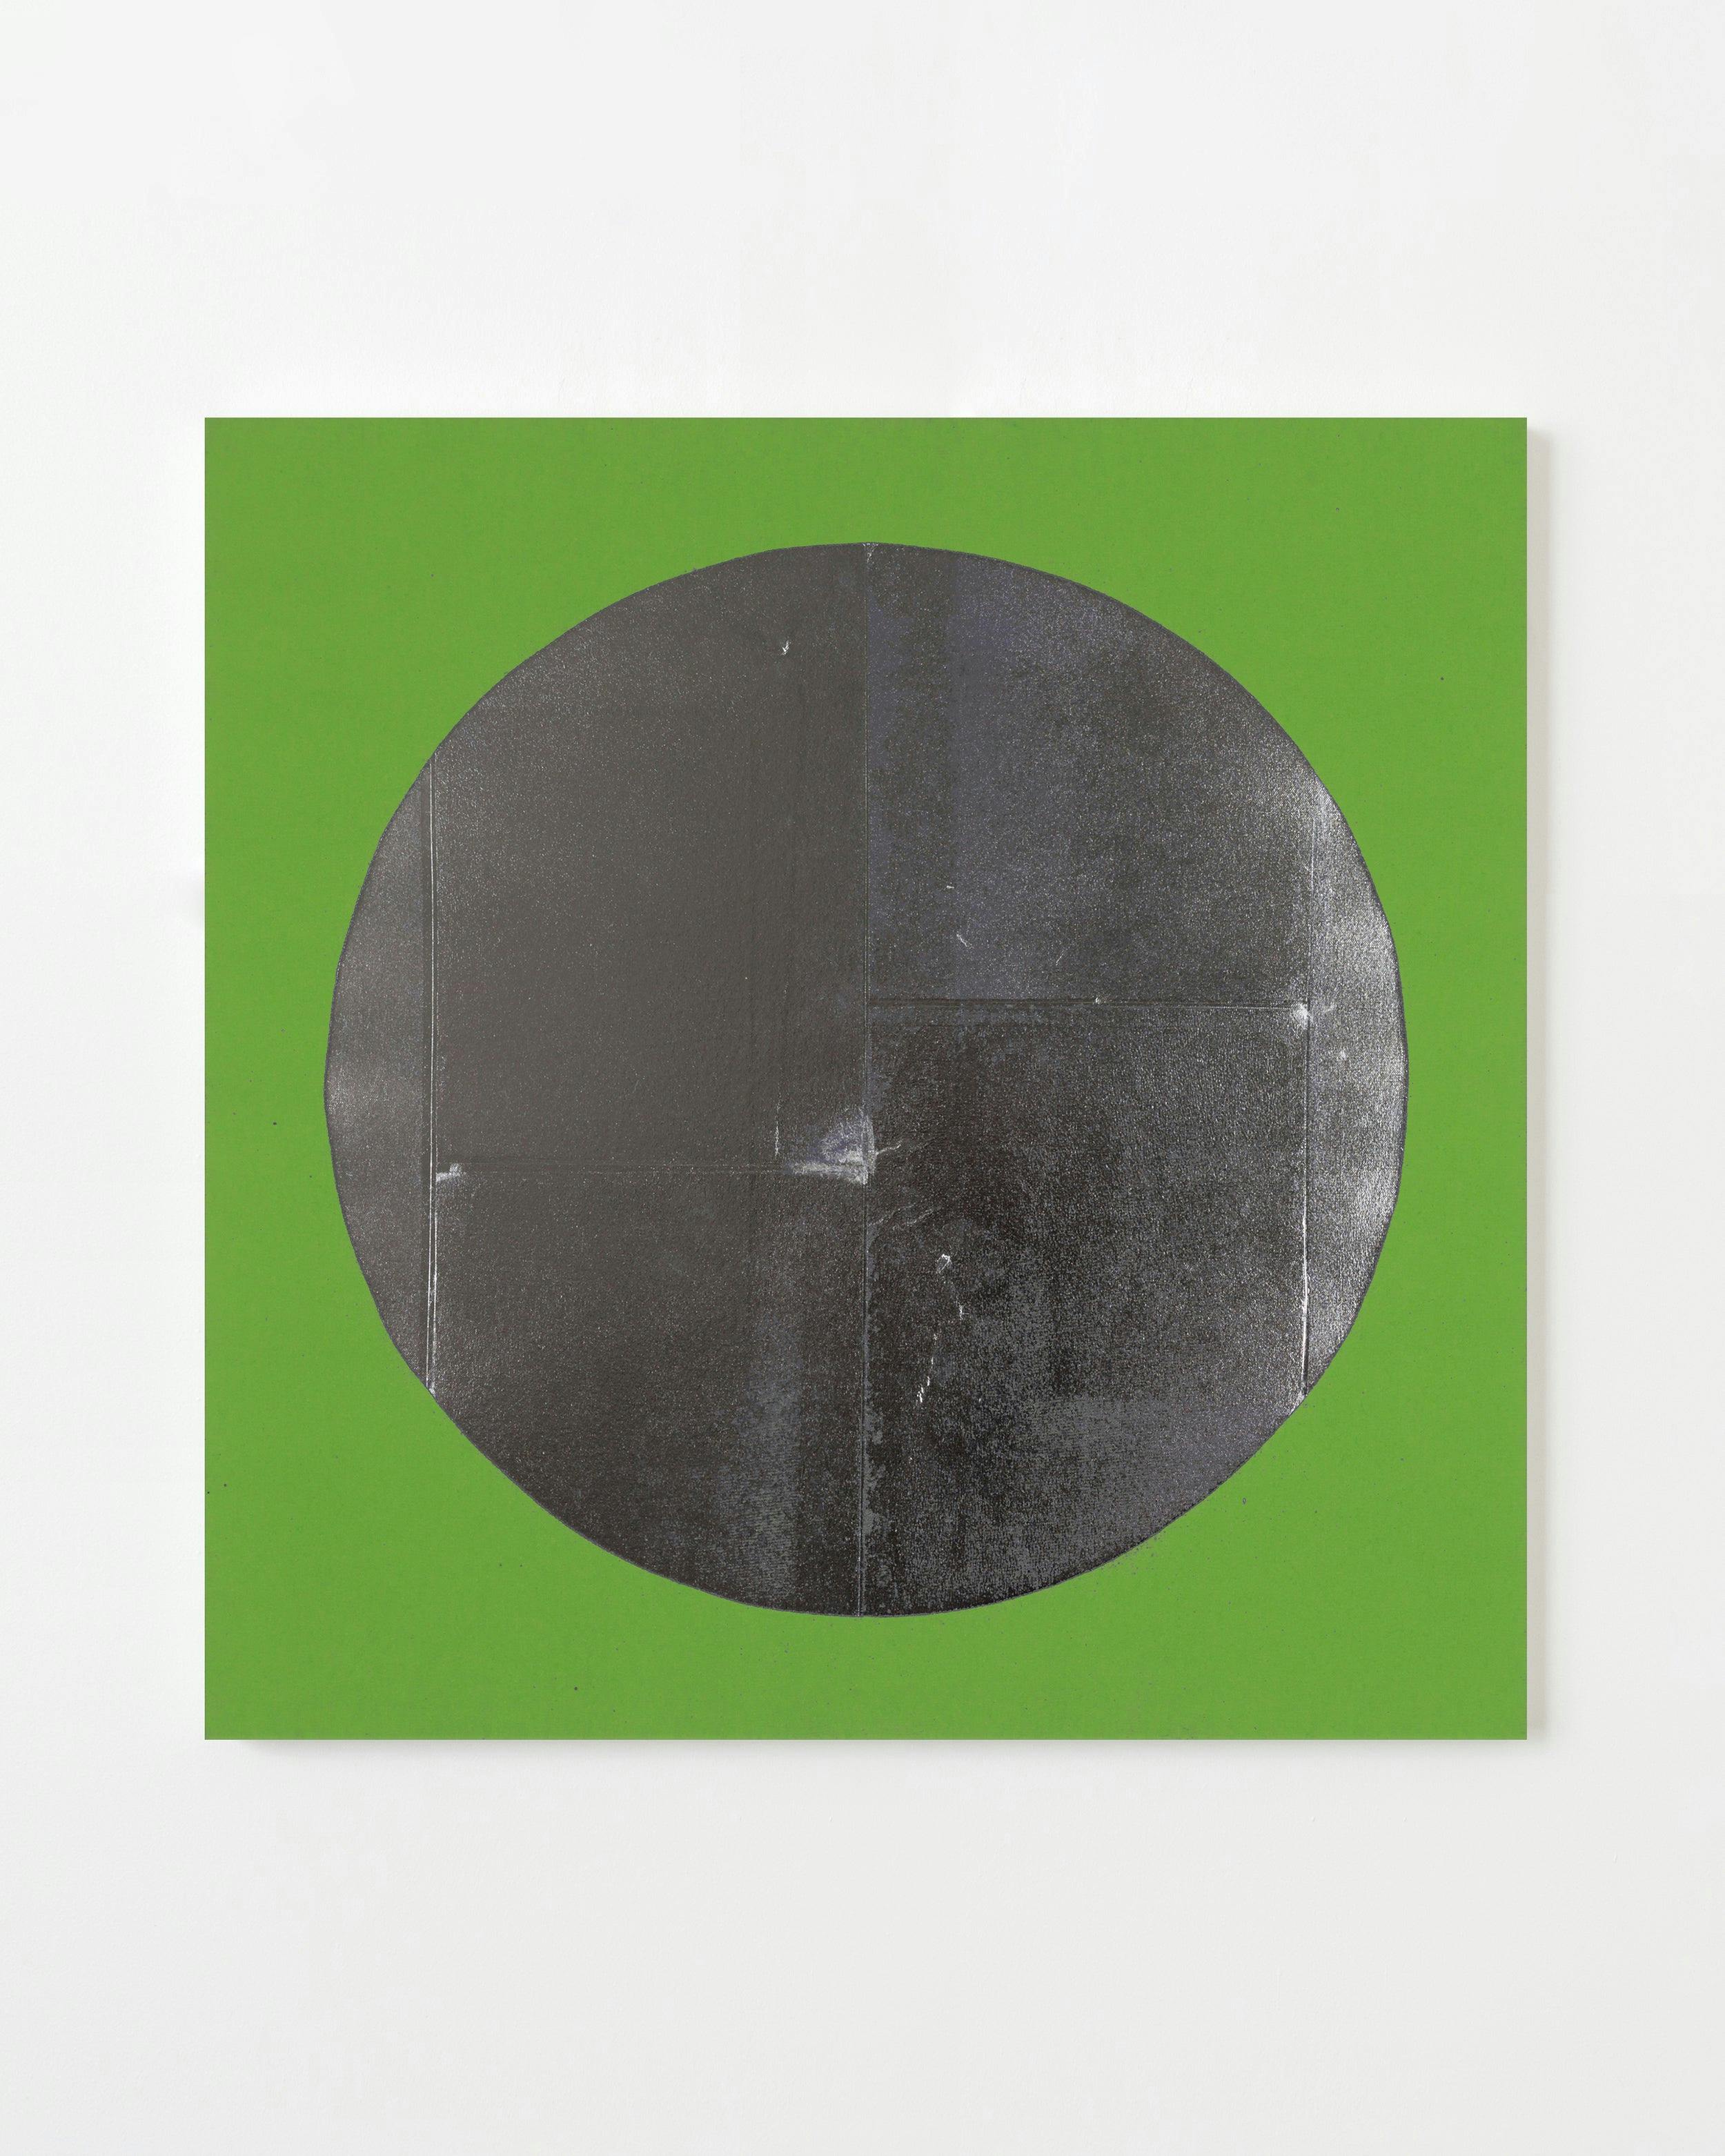 Painting by Chad Kouri titled "Reflection Pool Green (3x3)".